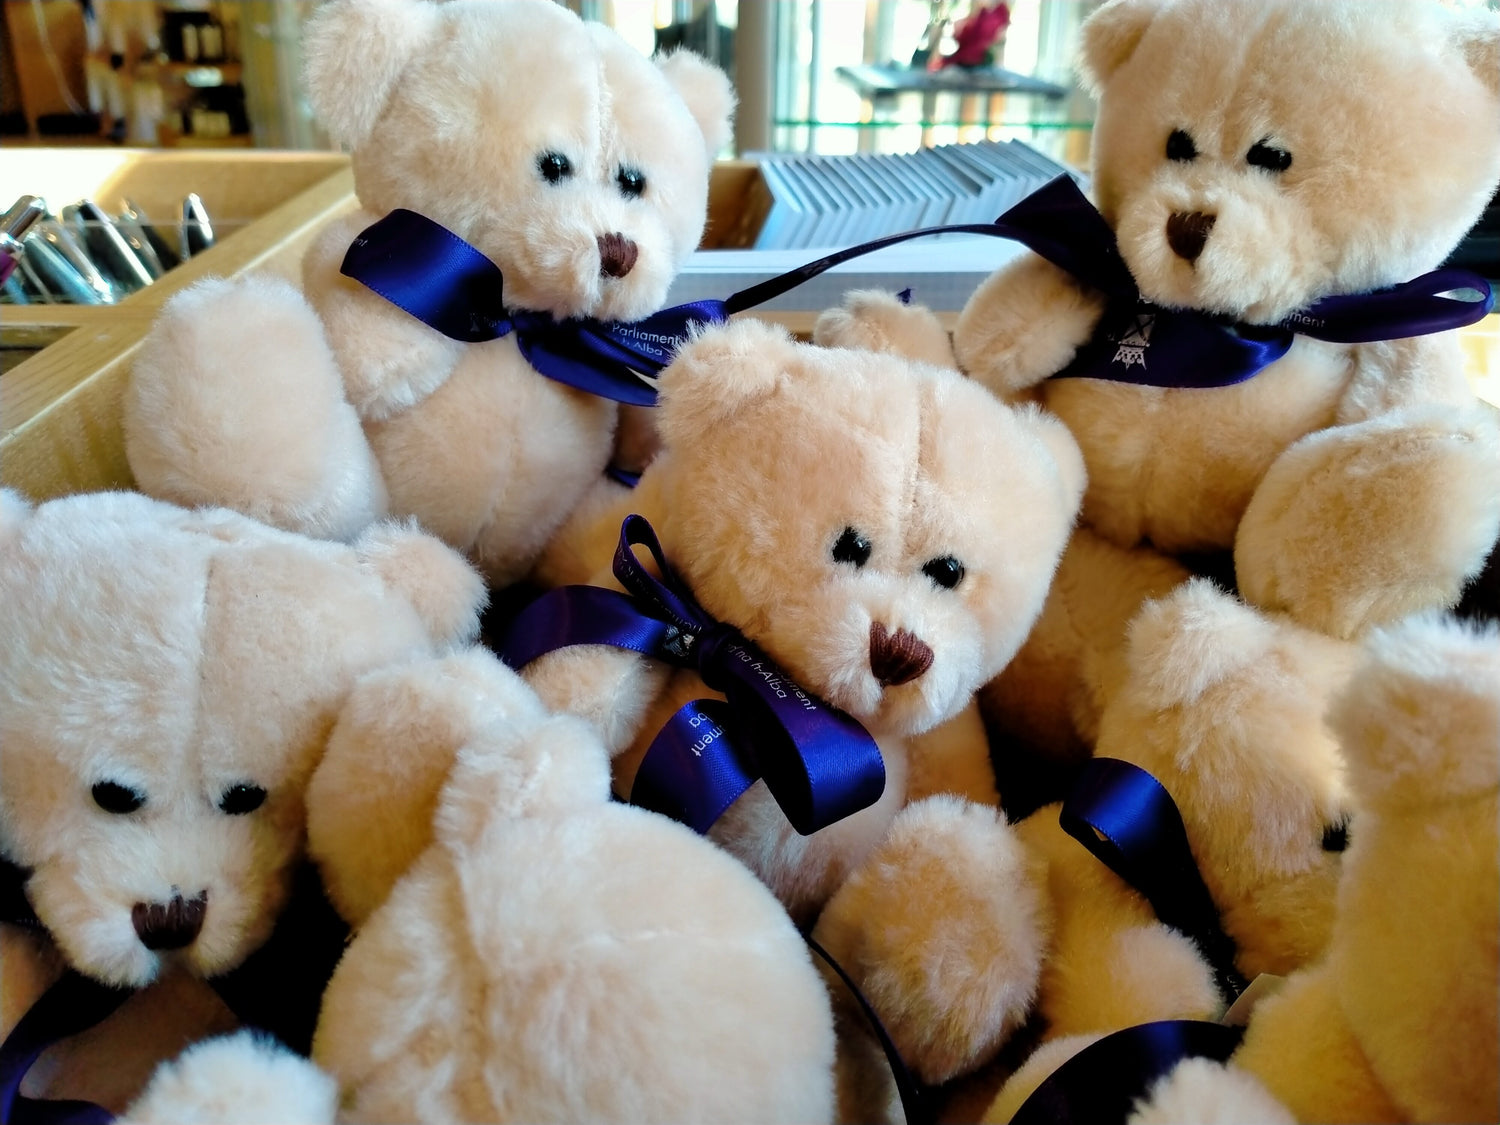 Teddy bears with purple ribbons.